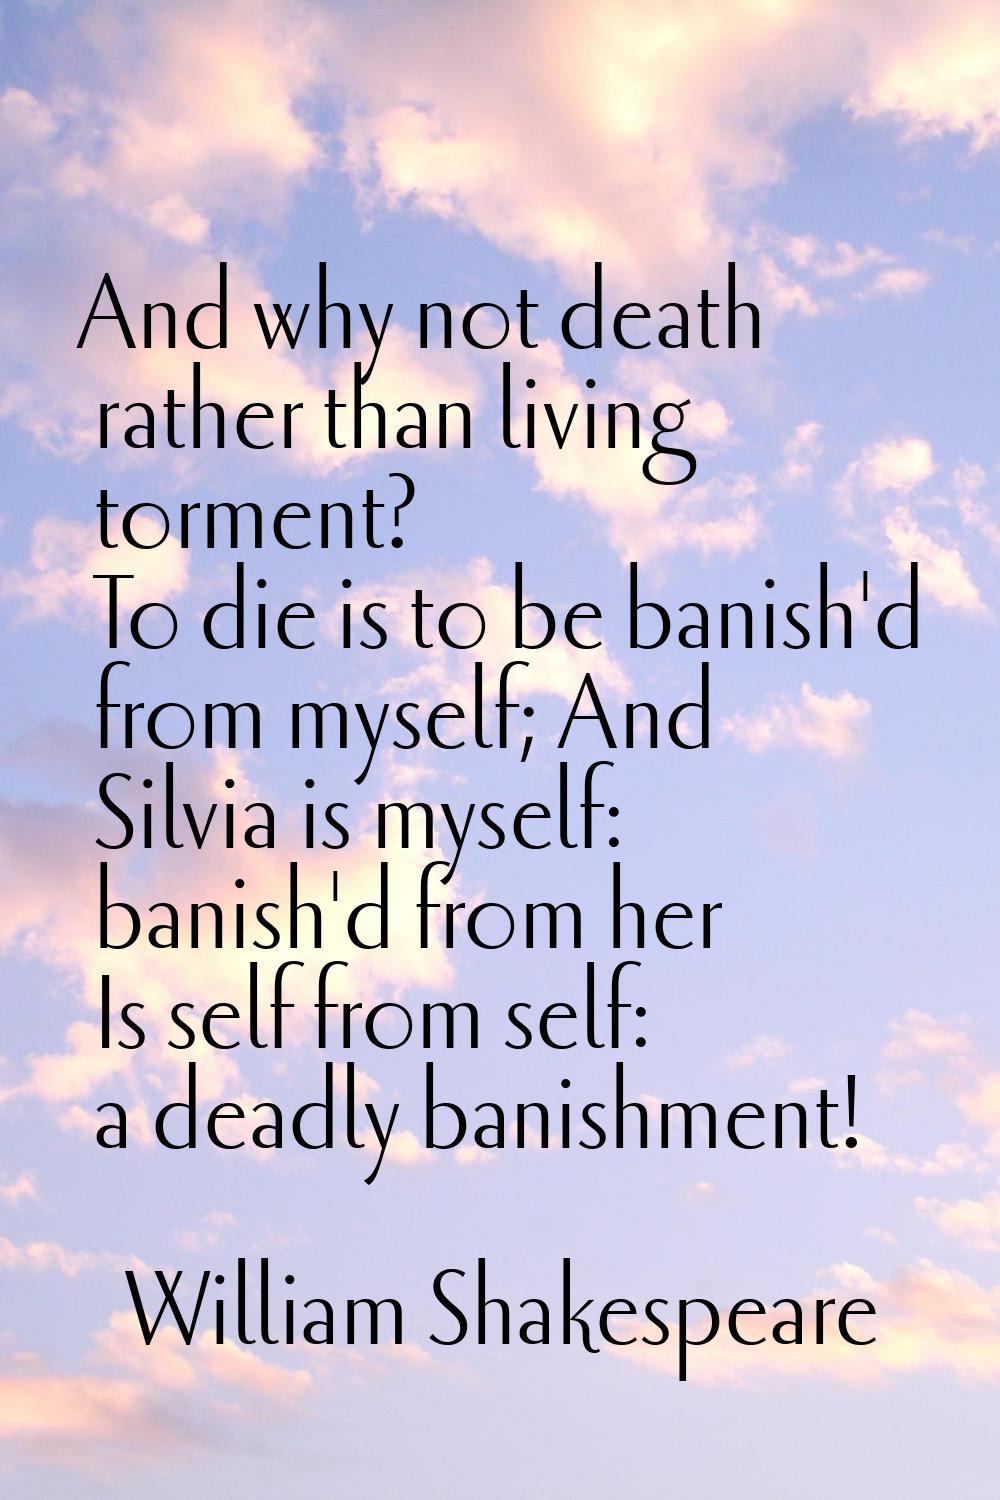 And why not death rather than living torment? To die is to be banish'd from myself; And Silvia is m